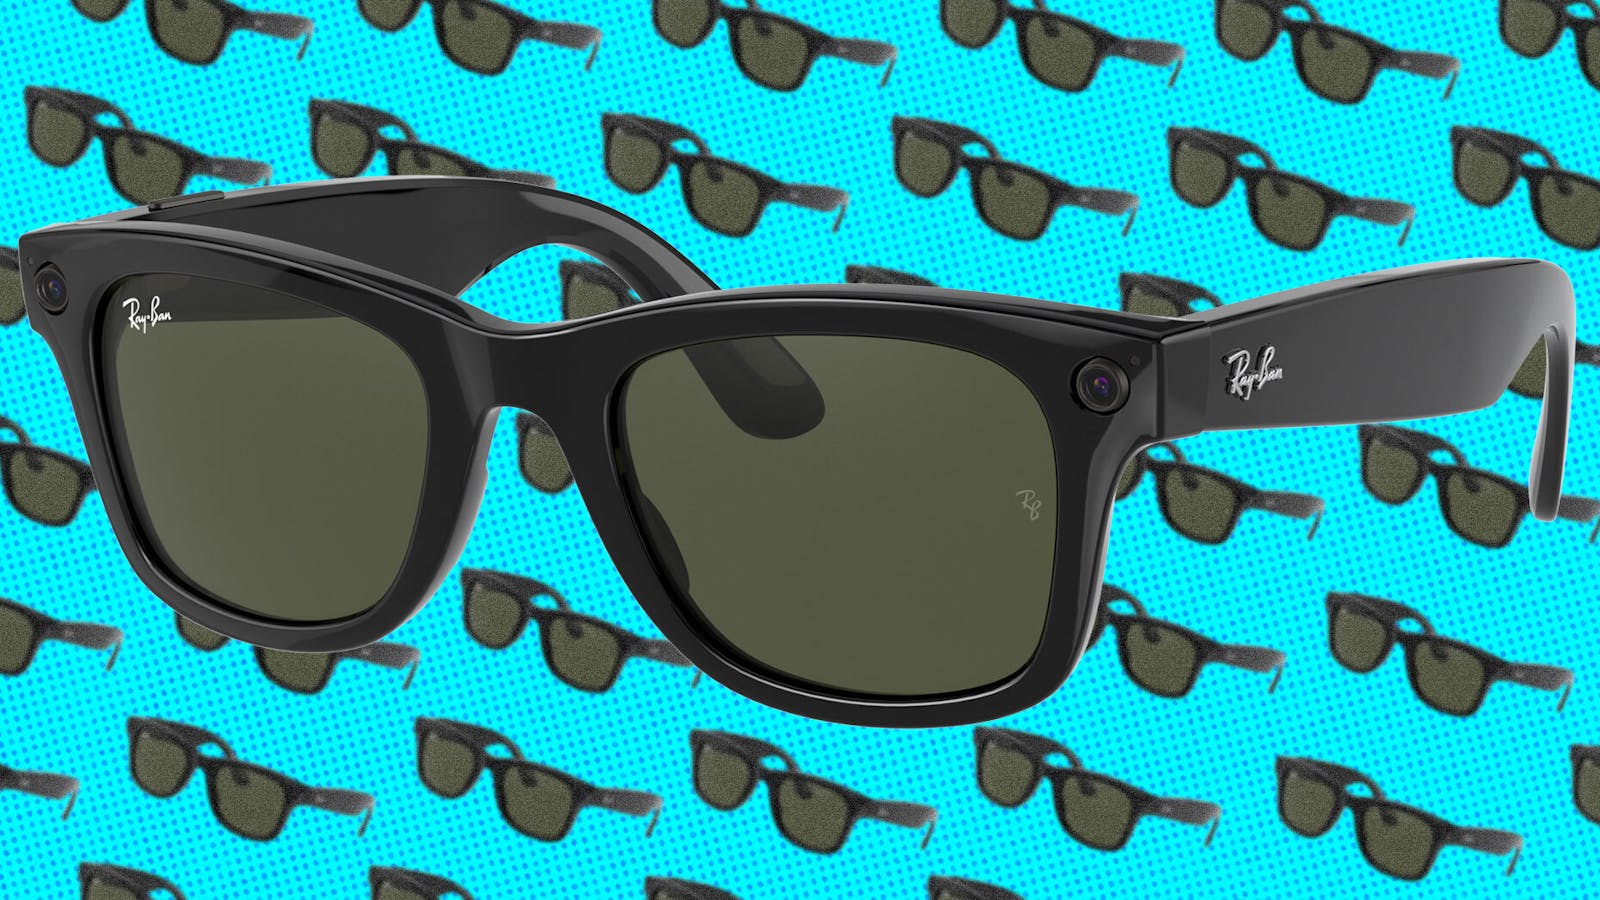 Photo of Facebook's Ray-Ban Stories glasses (with Wayfarer frames). Illustration by Mike Sullivan